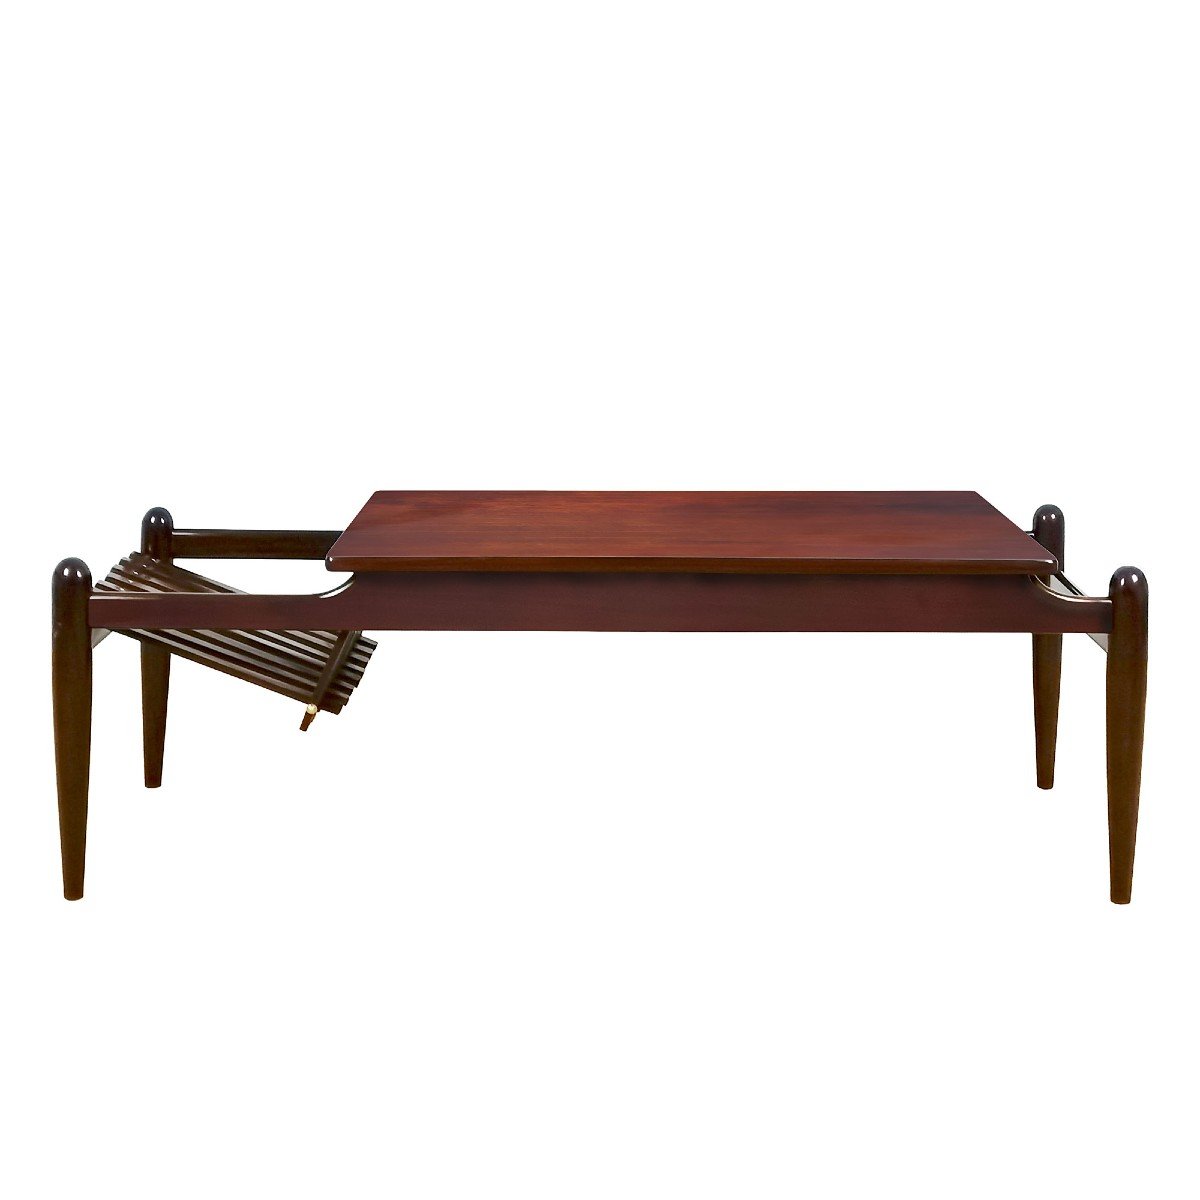 Coffee Table With Magazine Rack In Solid Mahogany - Italy 1950